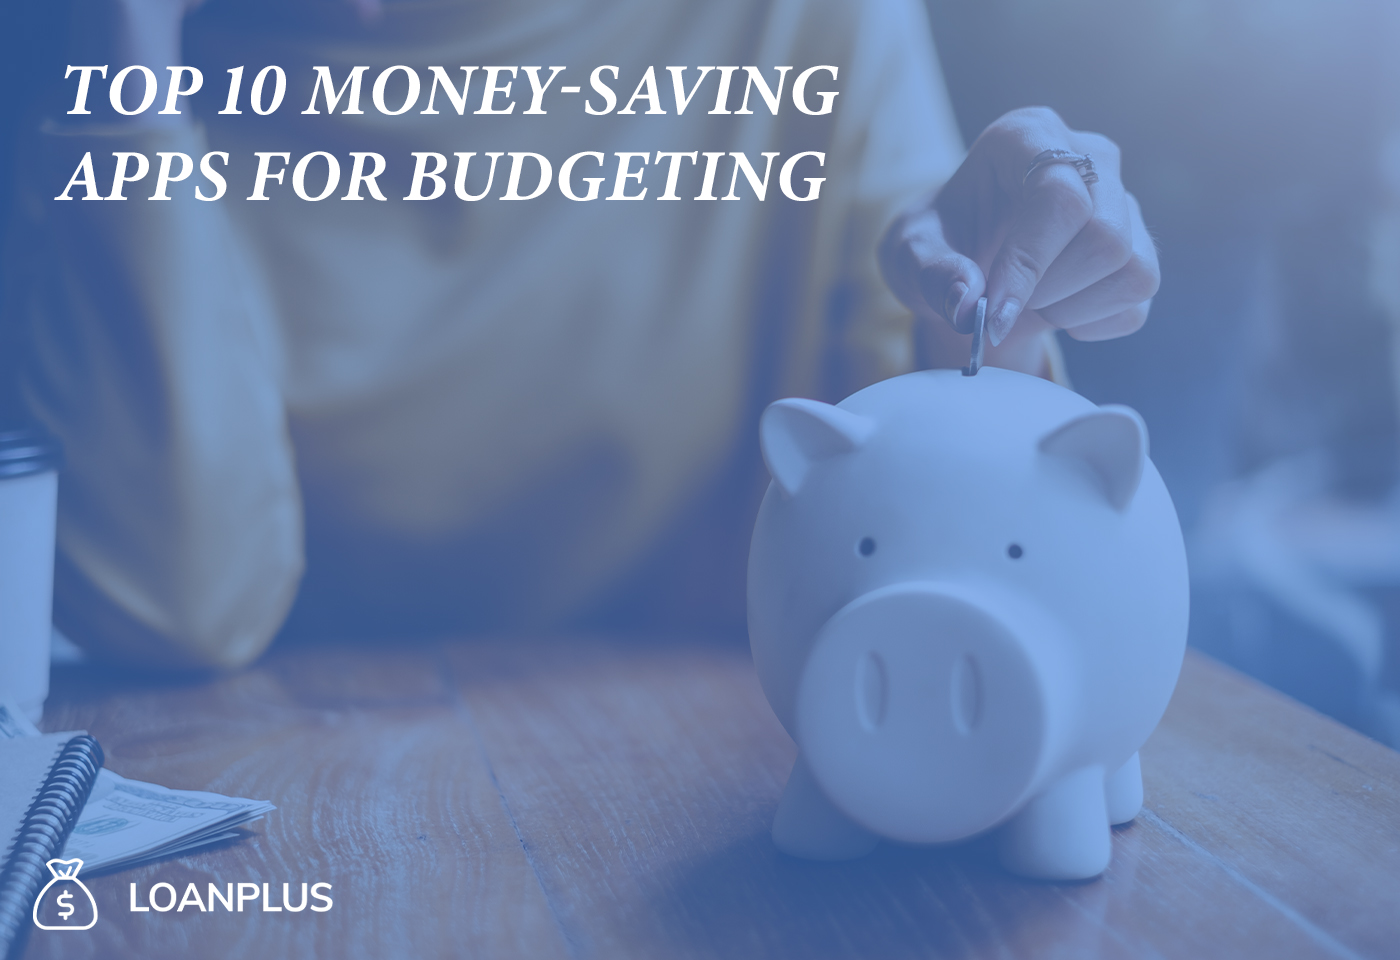 Top 10 Money-Saving Apps for Budgeting